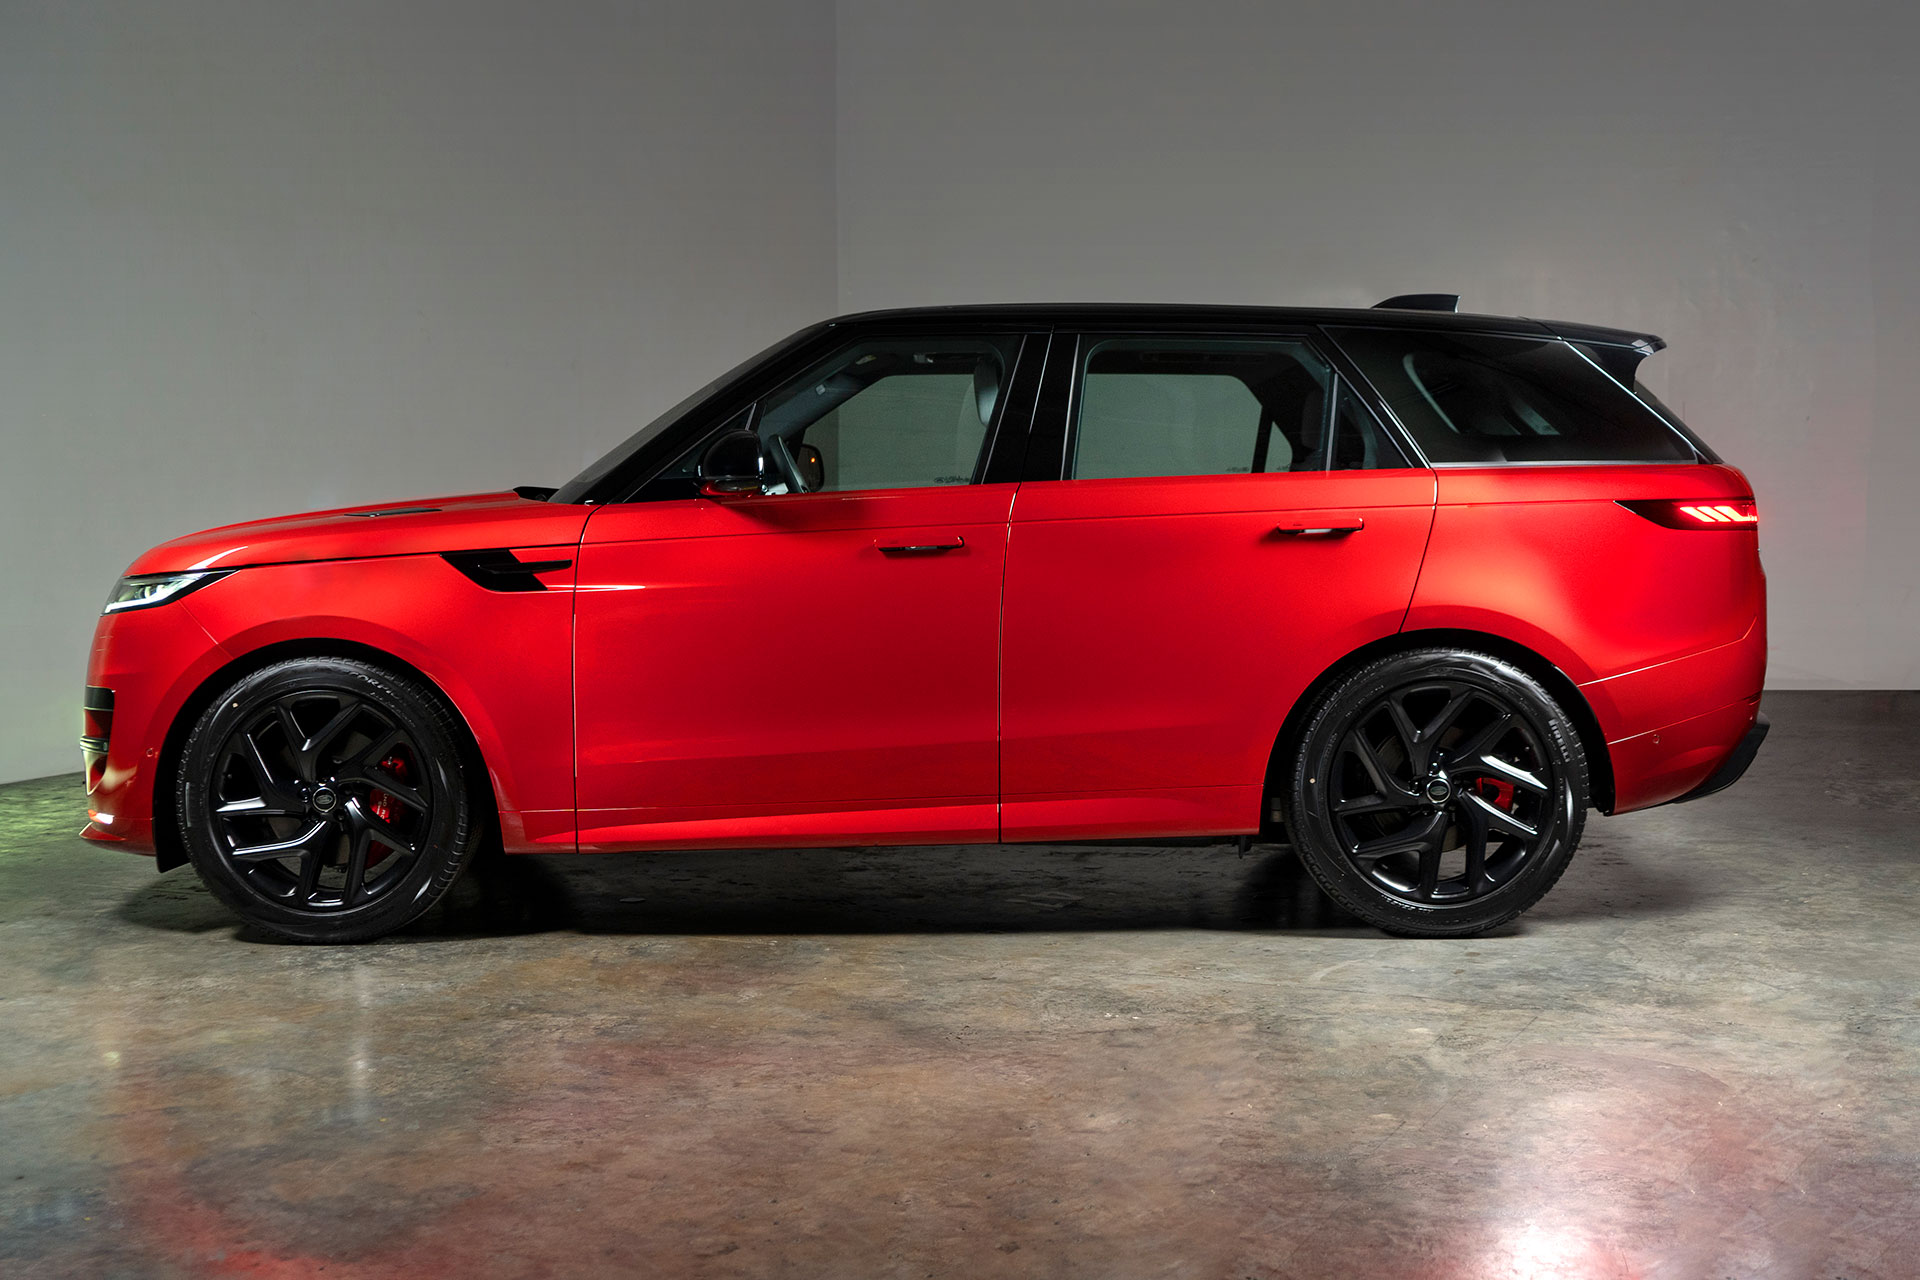 RangeRover_Exteriors_Red-Side